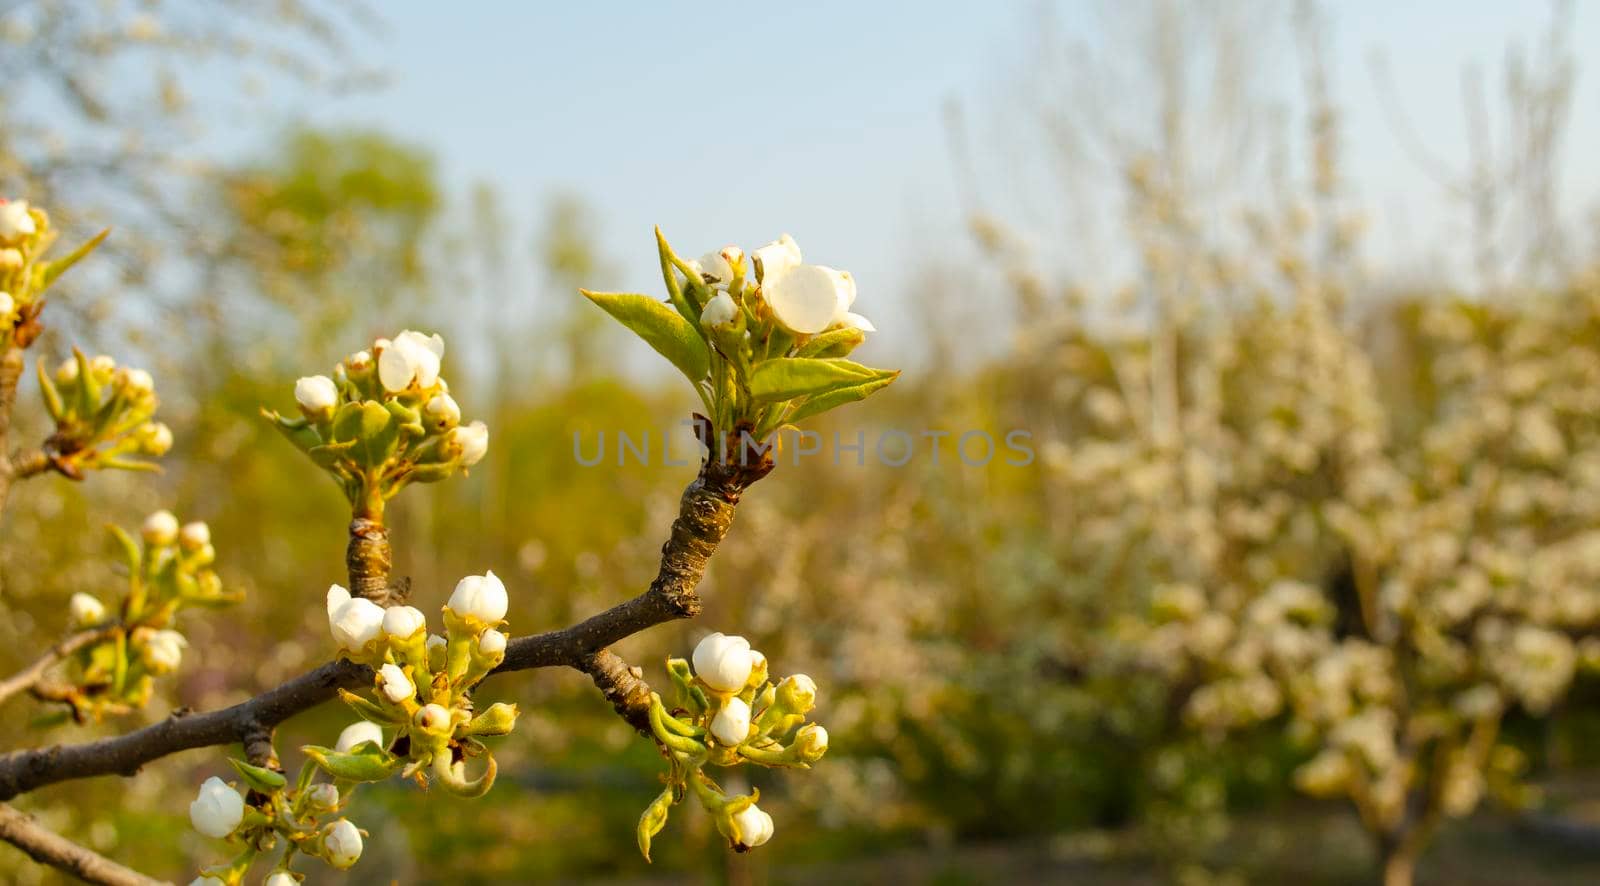 Beautiful white apple or pear blossom. Flowering apple pear tree.Fresh spring background on nature outdoors.Soft focus image of blossoming flowers in spring time.For easter and spring greeting cards by mtx